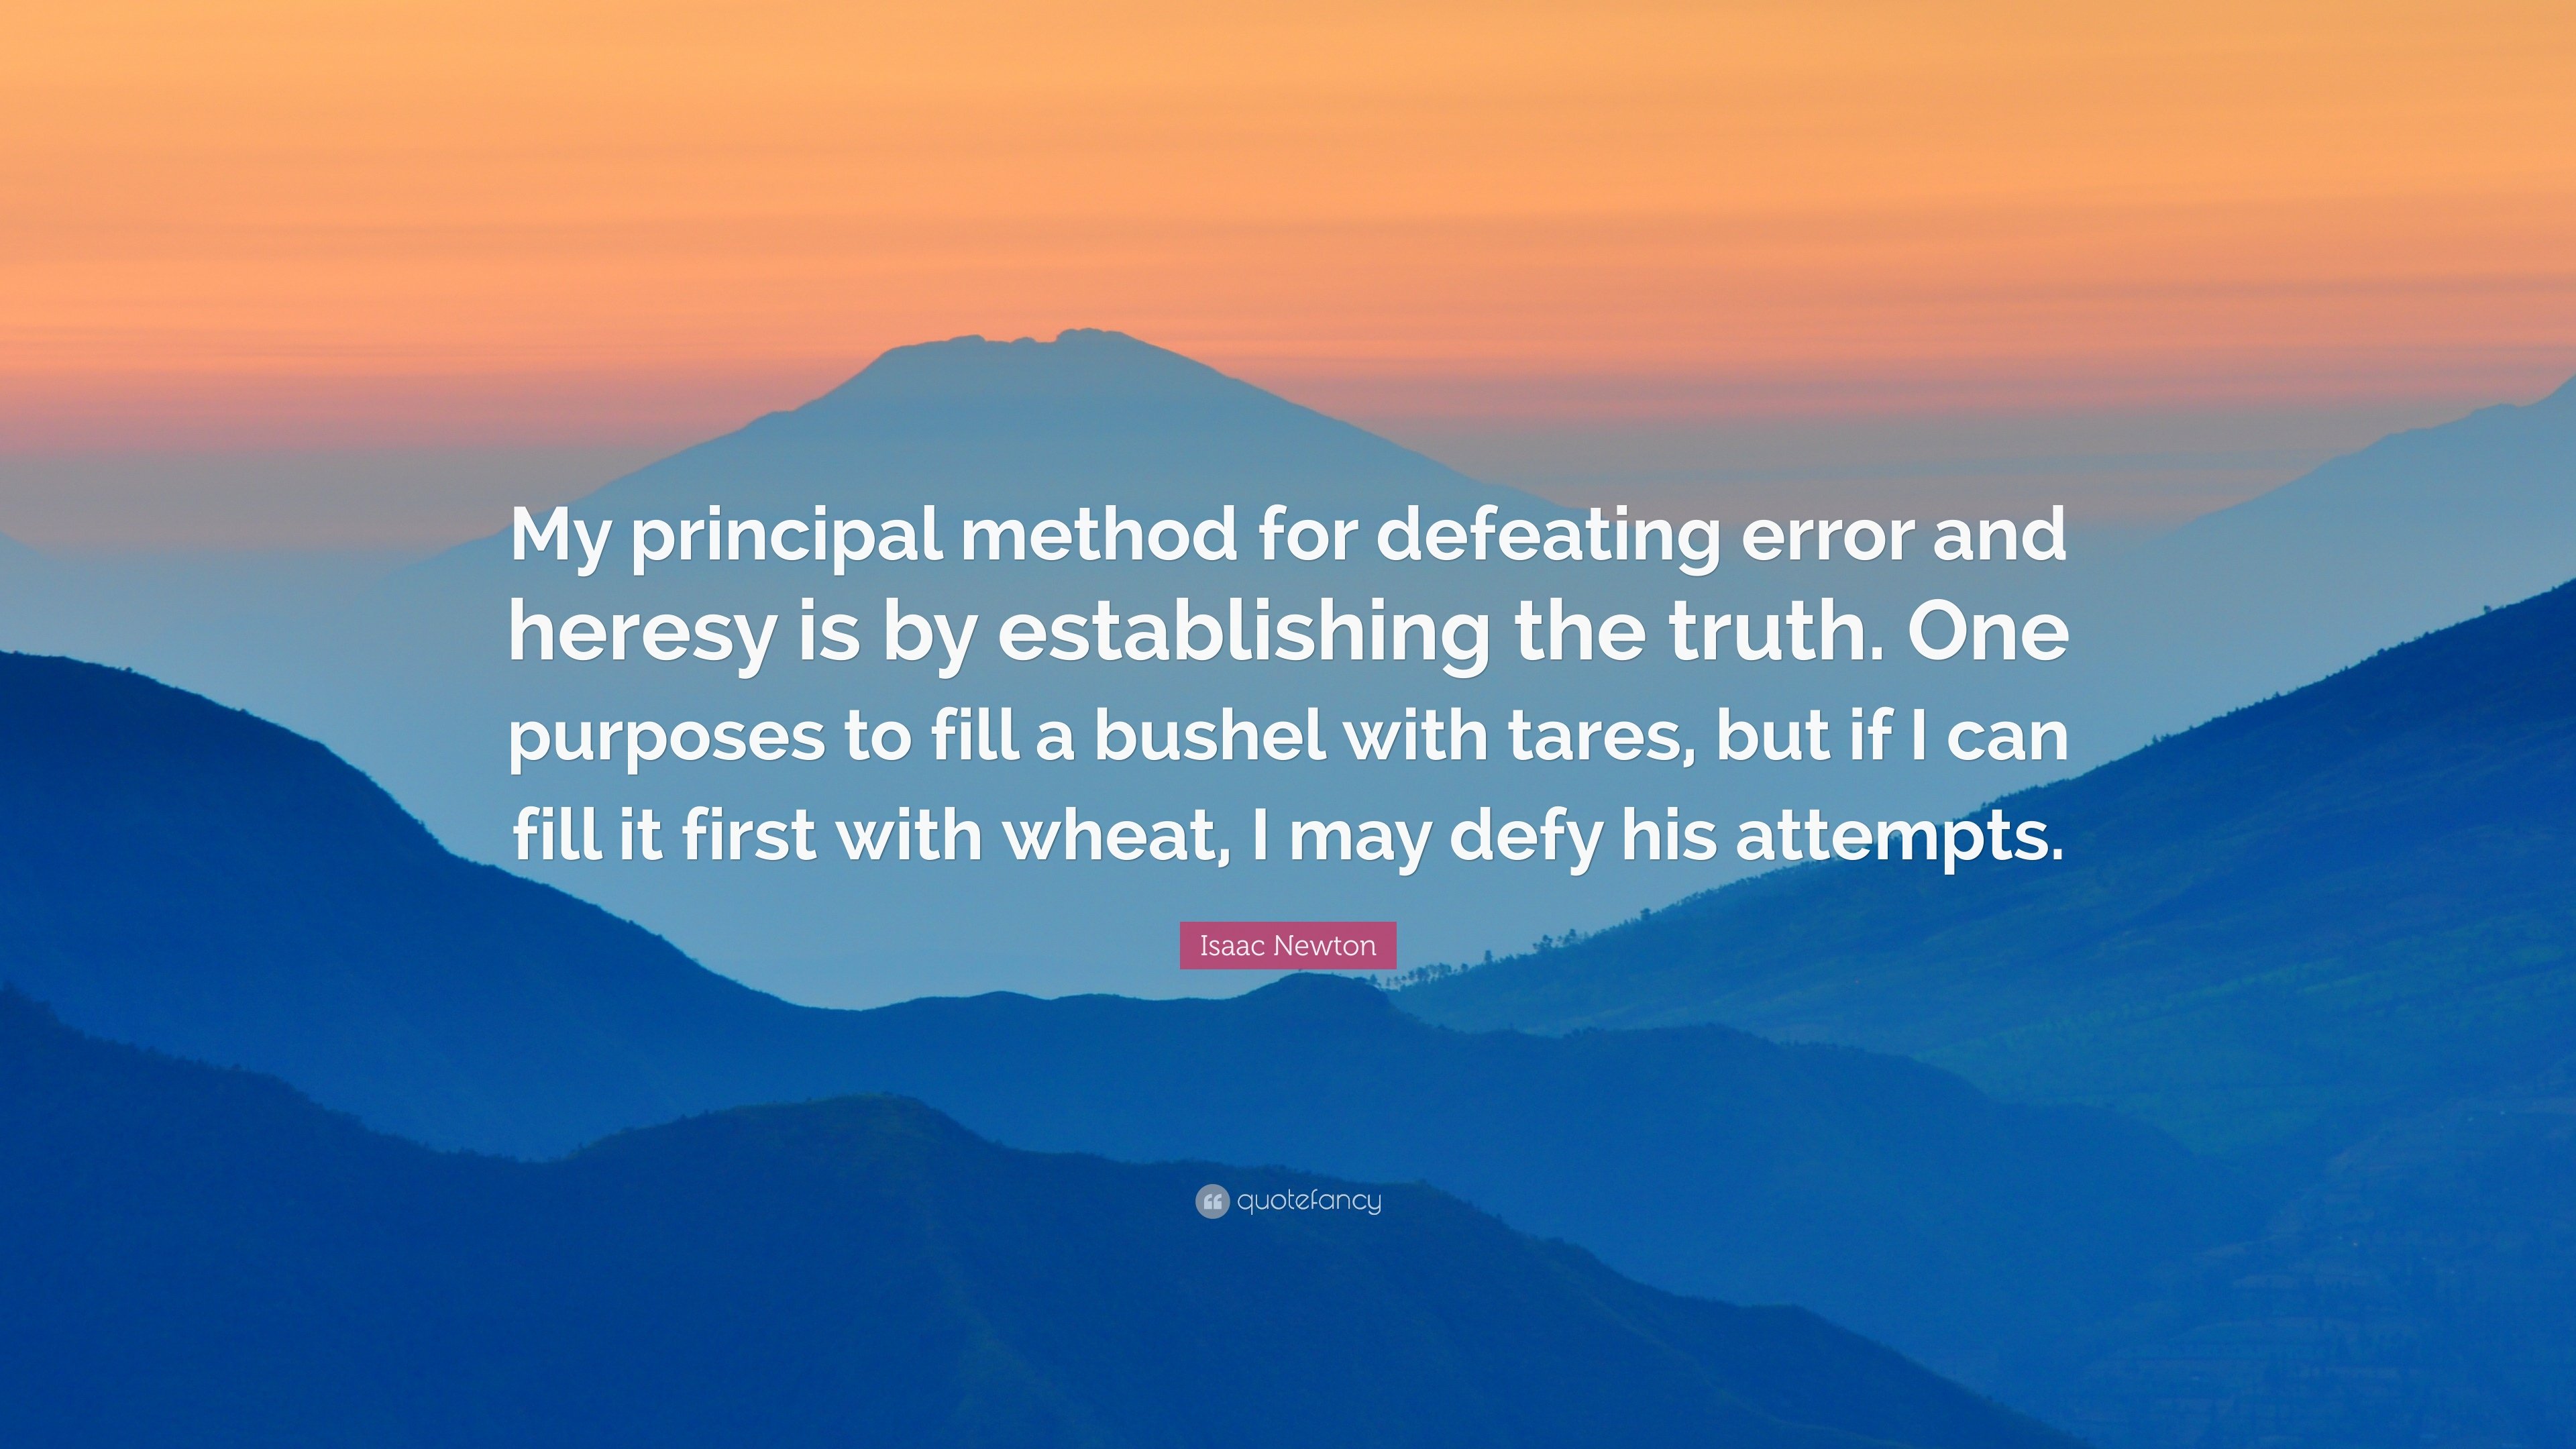 Isaac Newton Quote: “My principal method for defeating error